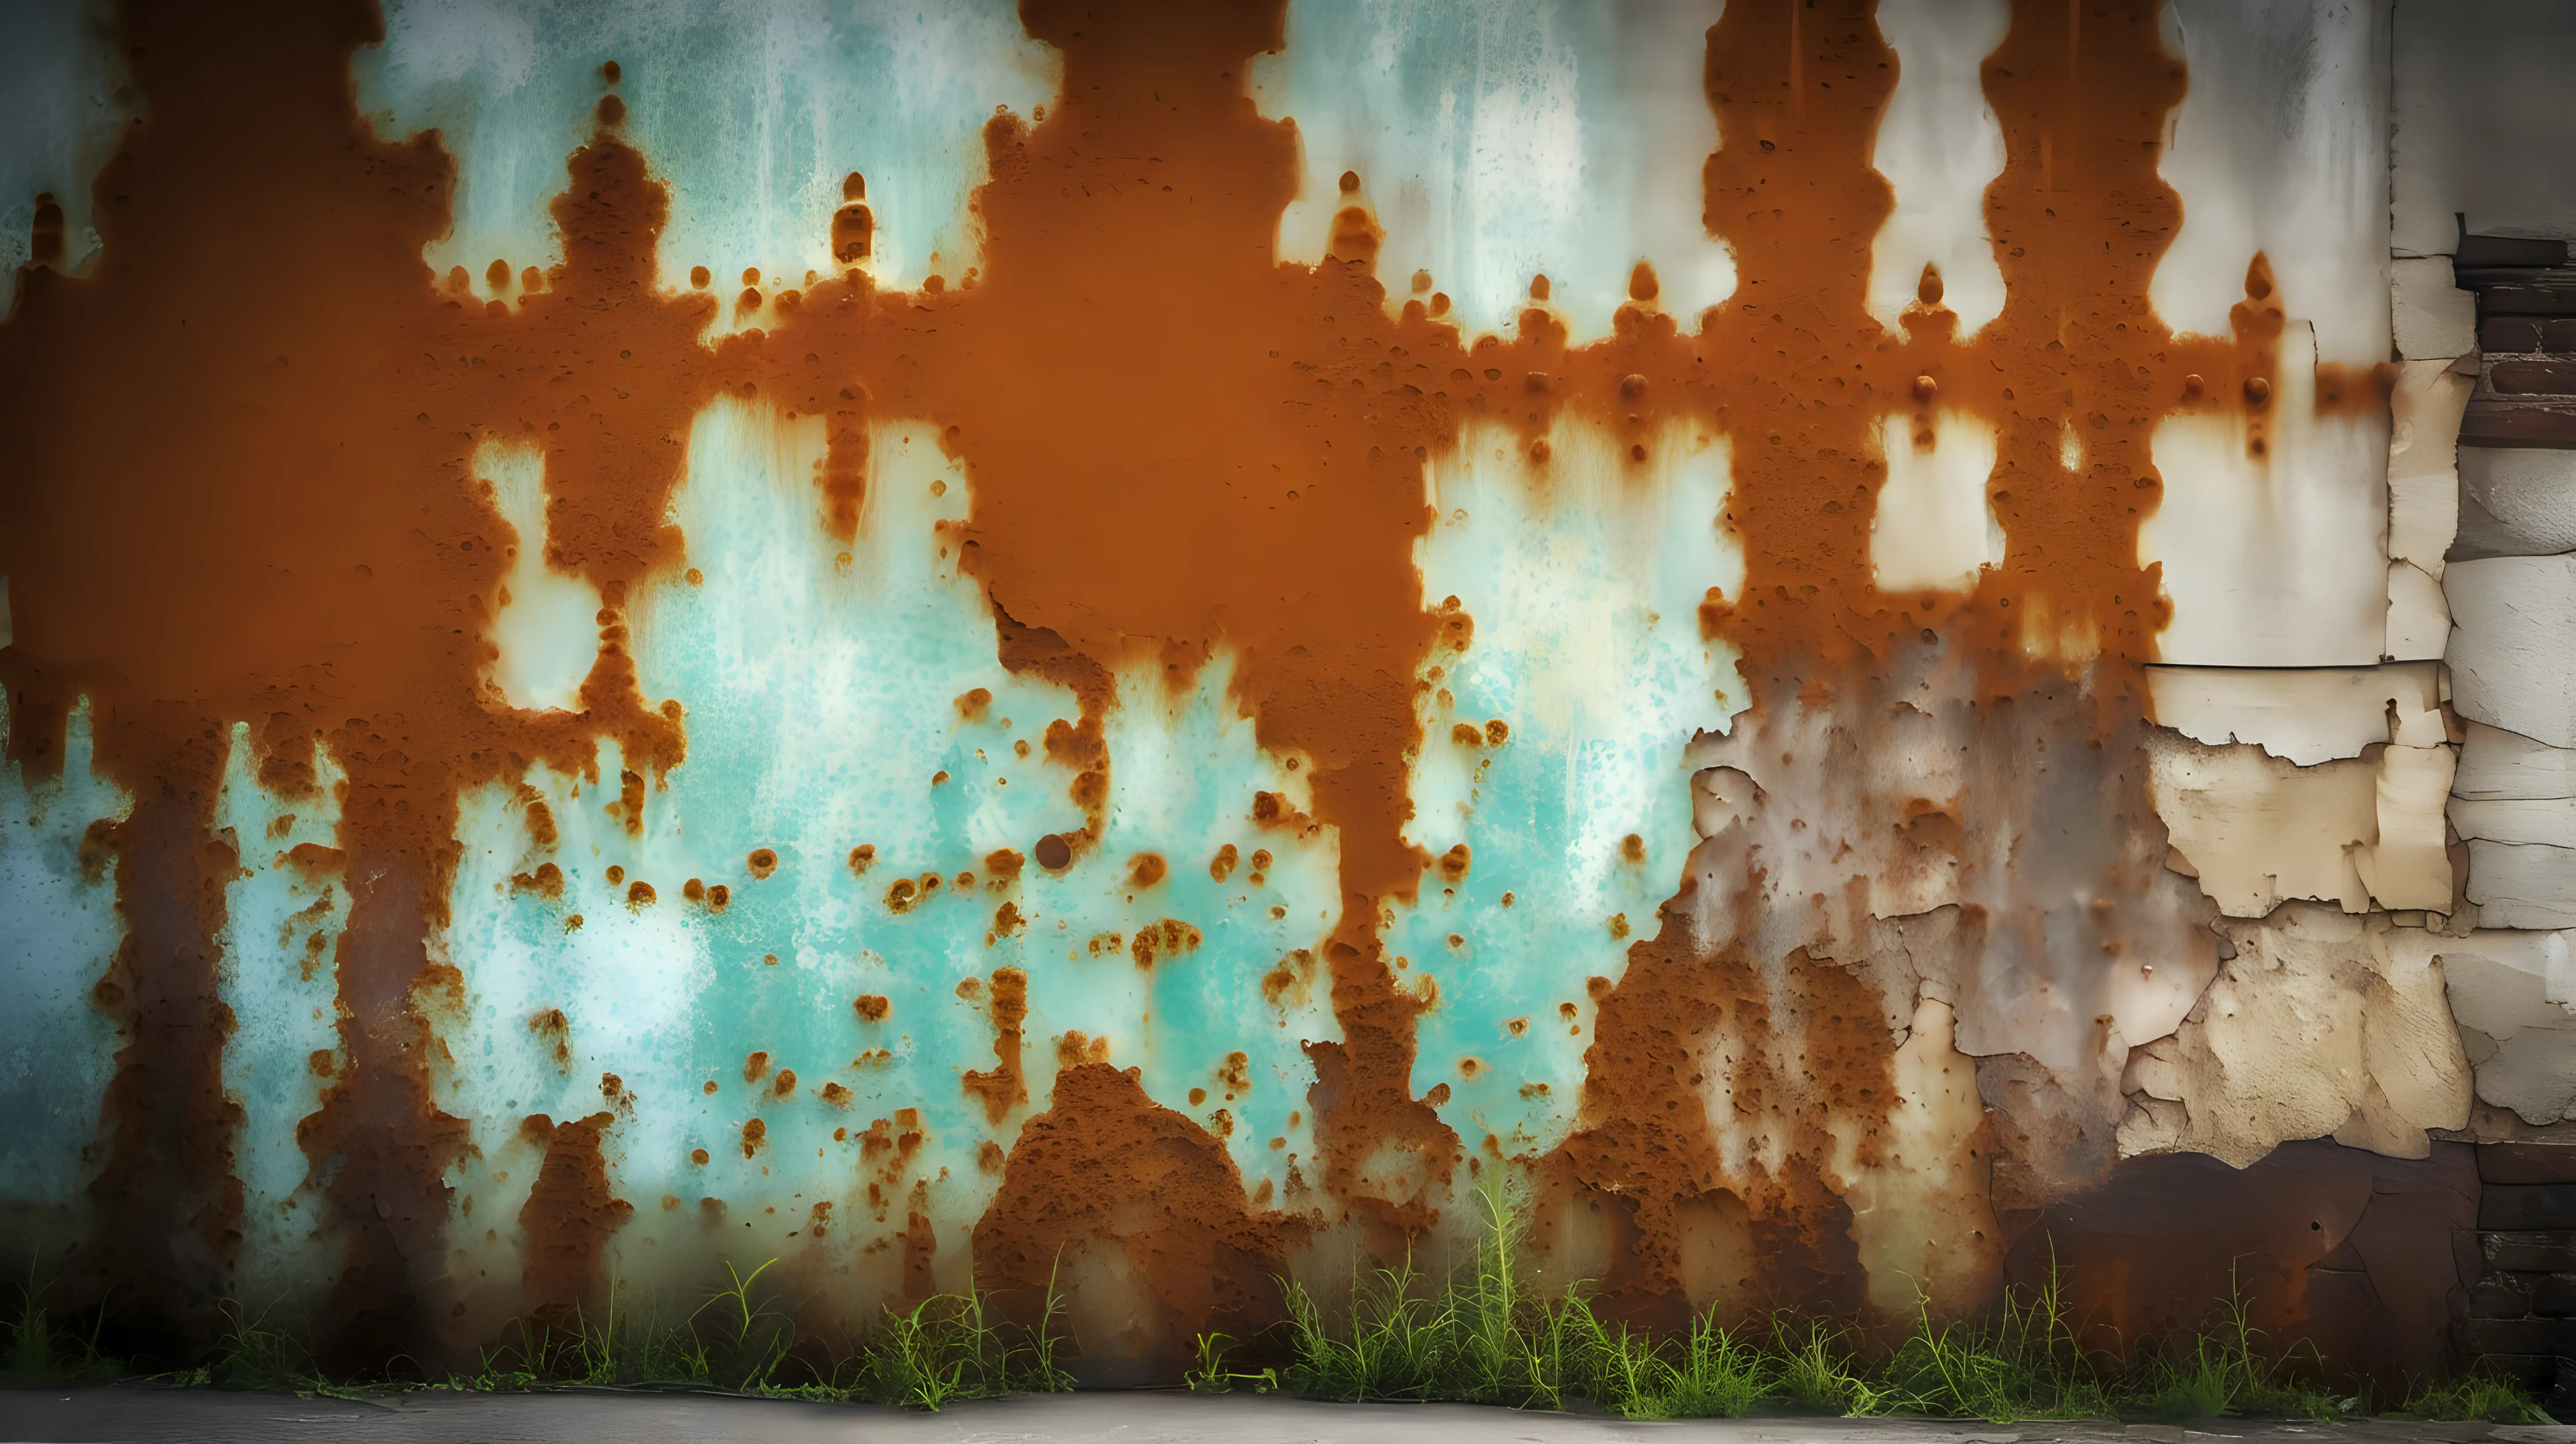 Weathered Patina on Old Grunge Wall